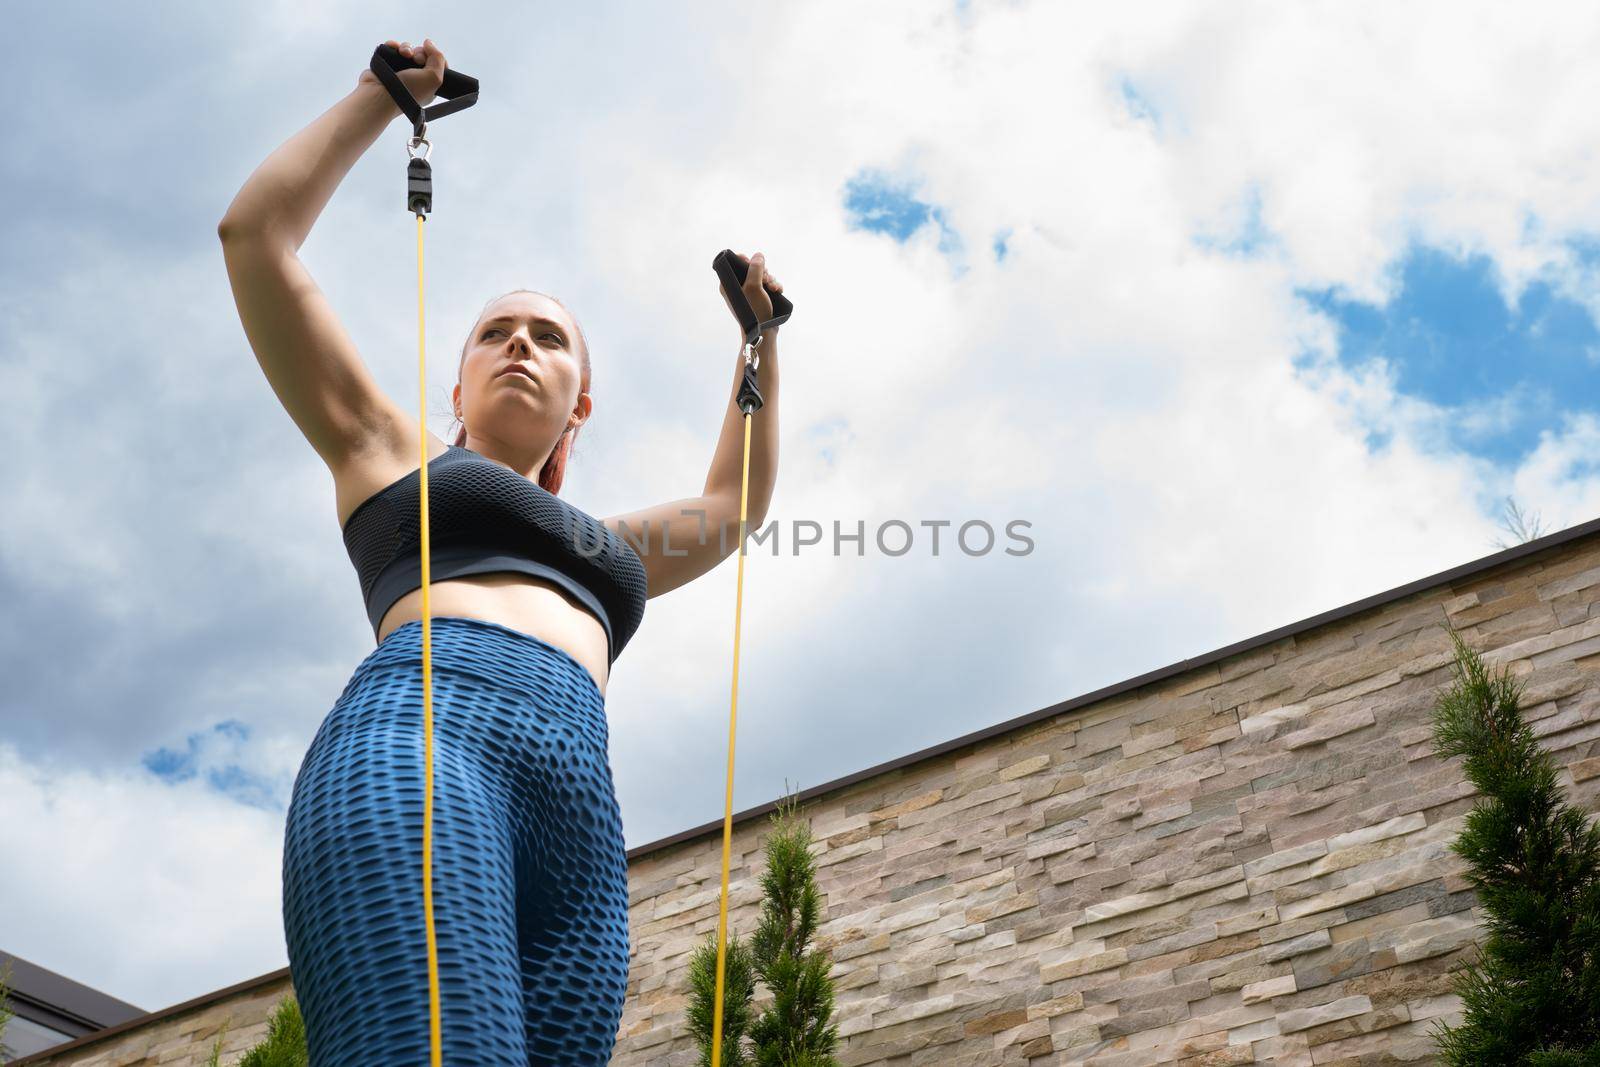 Attractive young fitness girl practising stretching exercise with rubber bands outdoors in the garden of her house. health and wellness concept.natural light in the garden.